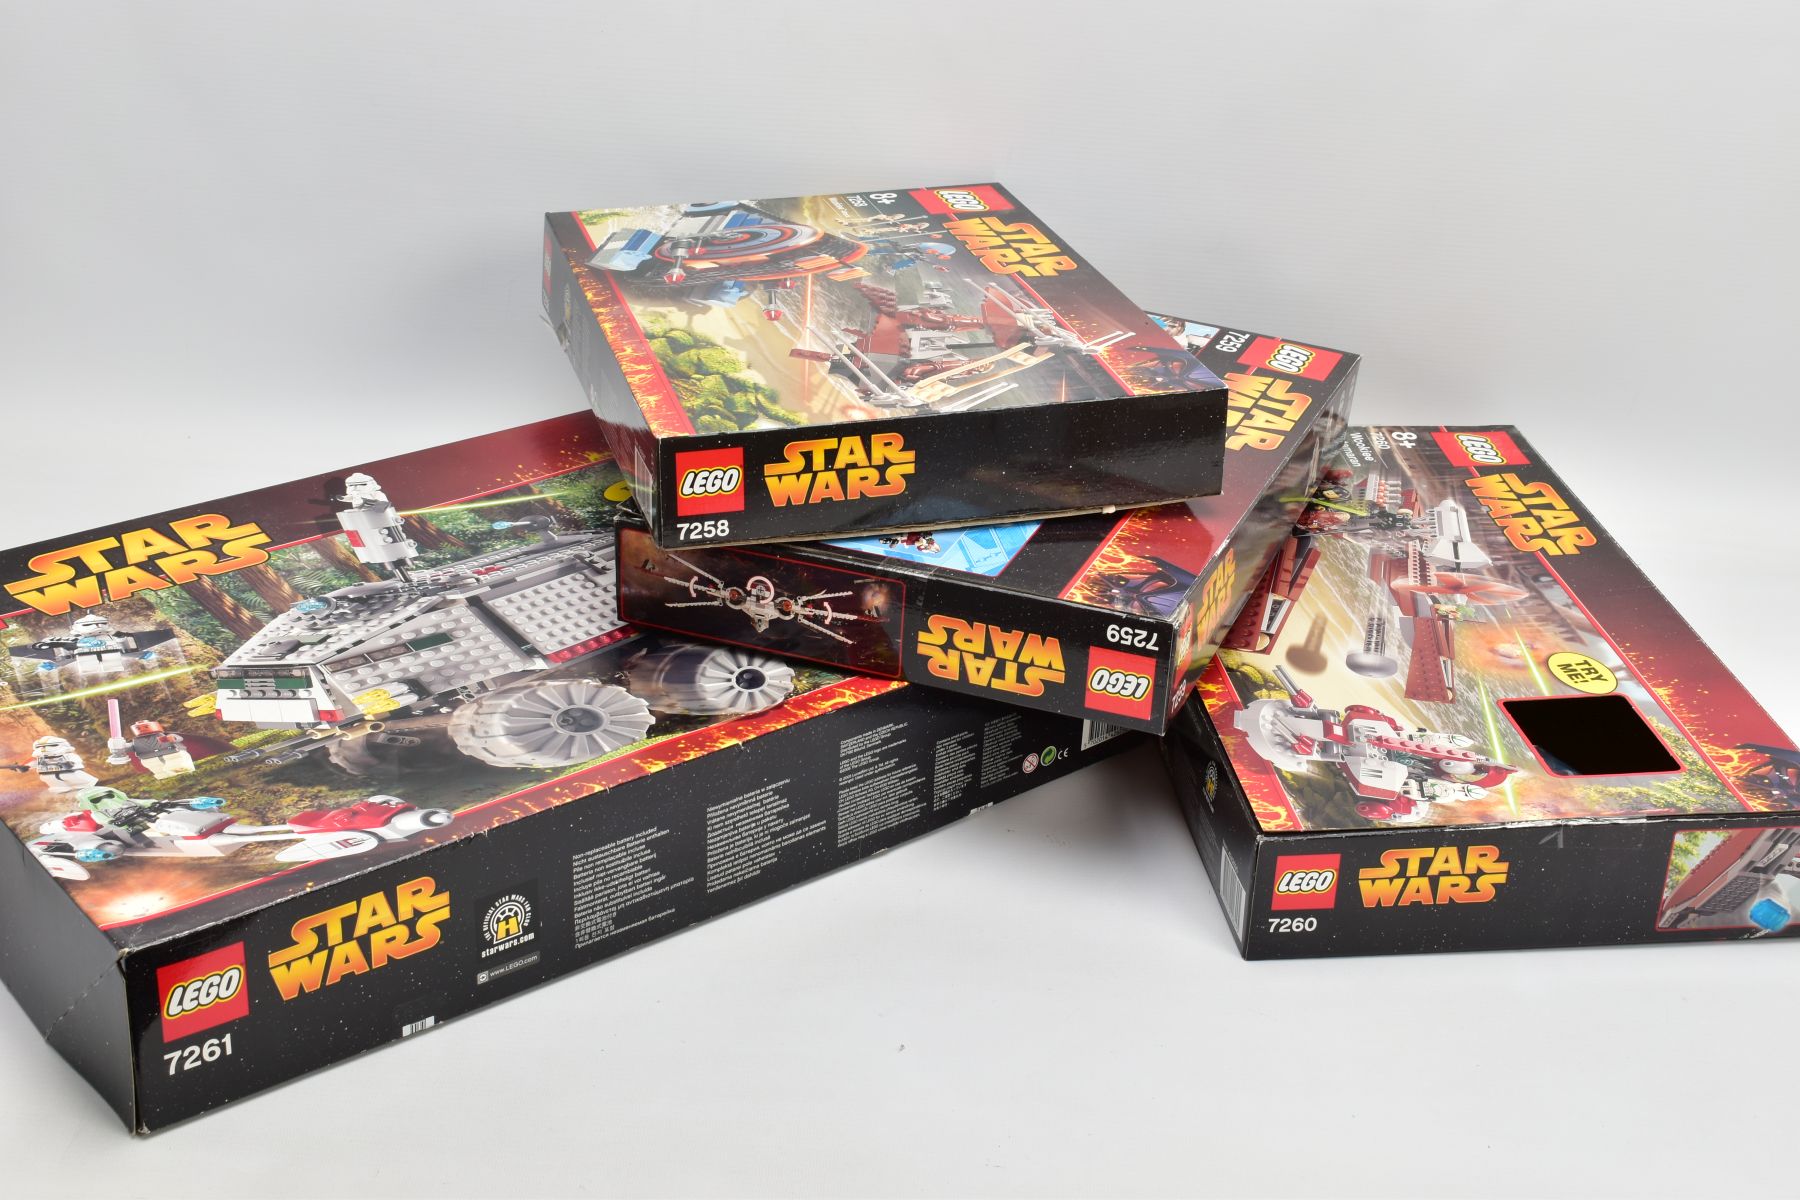 FOUR BOXED LEGO STAR WARS SETS, 7258 WOOKIE ATTACK, 7259 ARC-170 STAR FIGHTER, 7260 WOOKIE CATAMARAN - Image 3 of 3